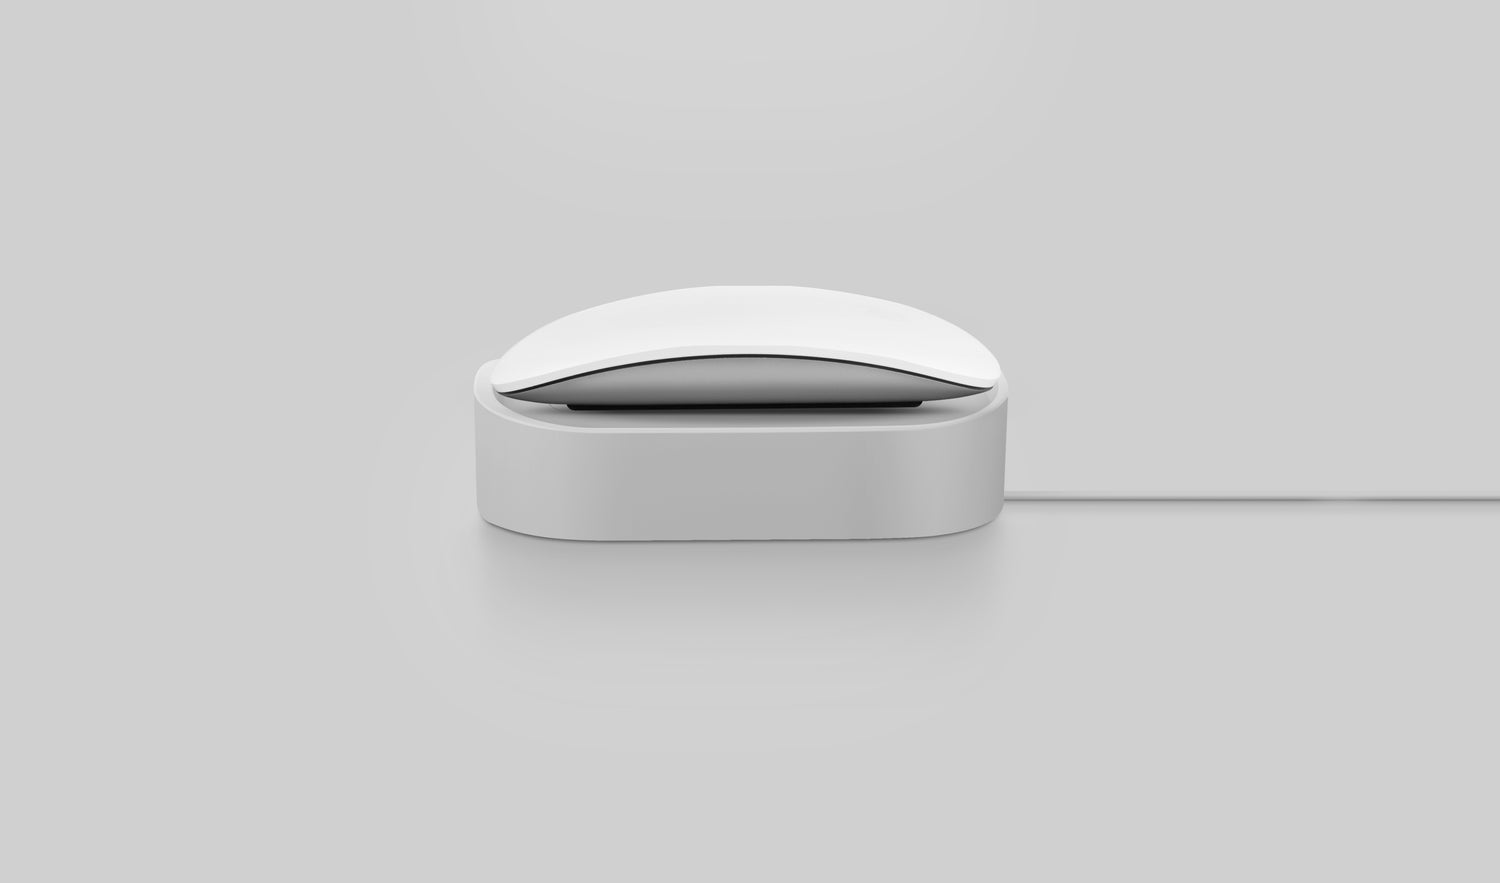 A mouse charging dock.